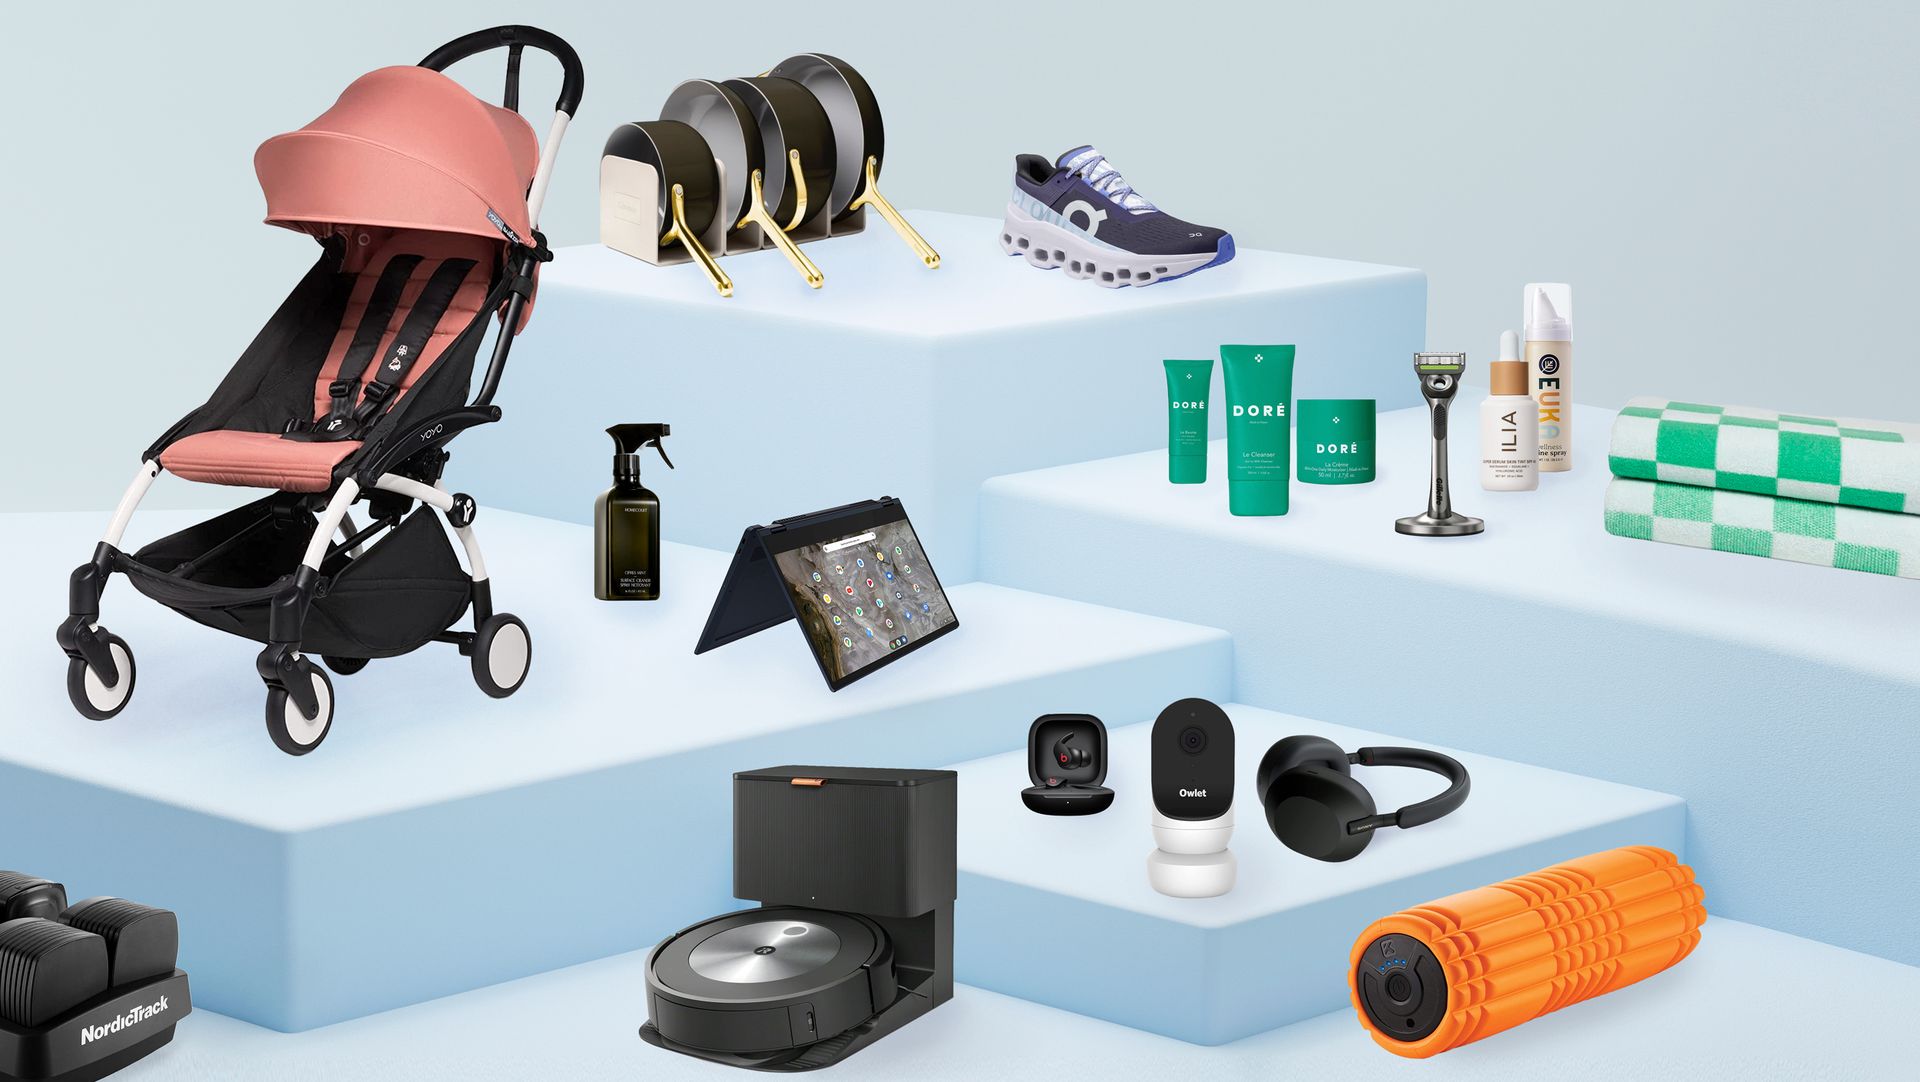 stroller, spray, pans, running shoes, beauty products, checkered towels, foam roller, robot vacuum, baby monitor, headphones, laptop, adjustable dumbbells